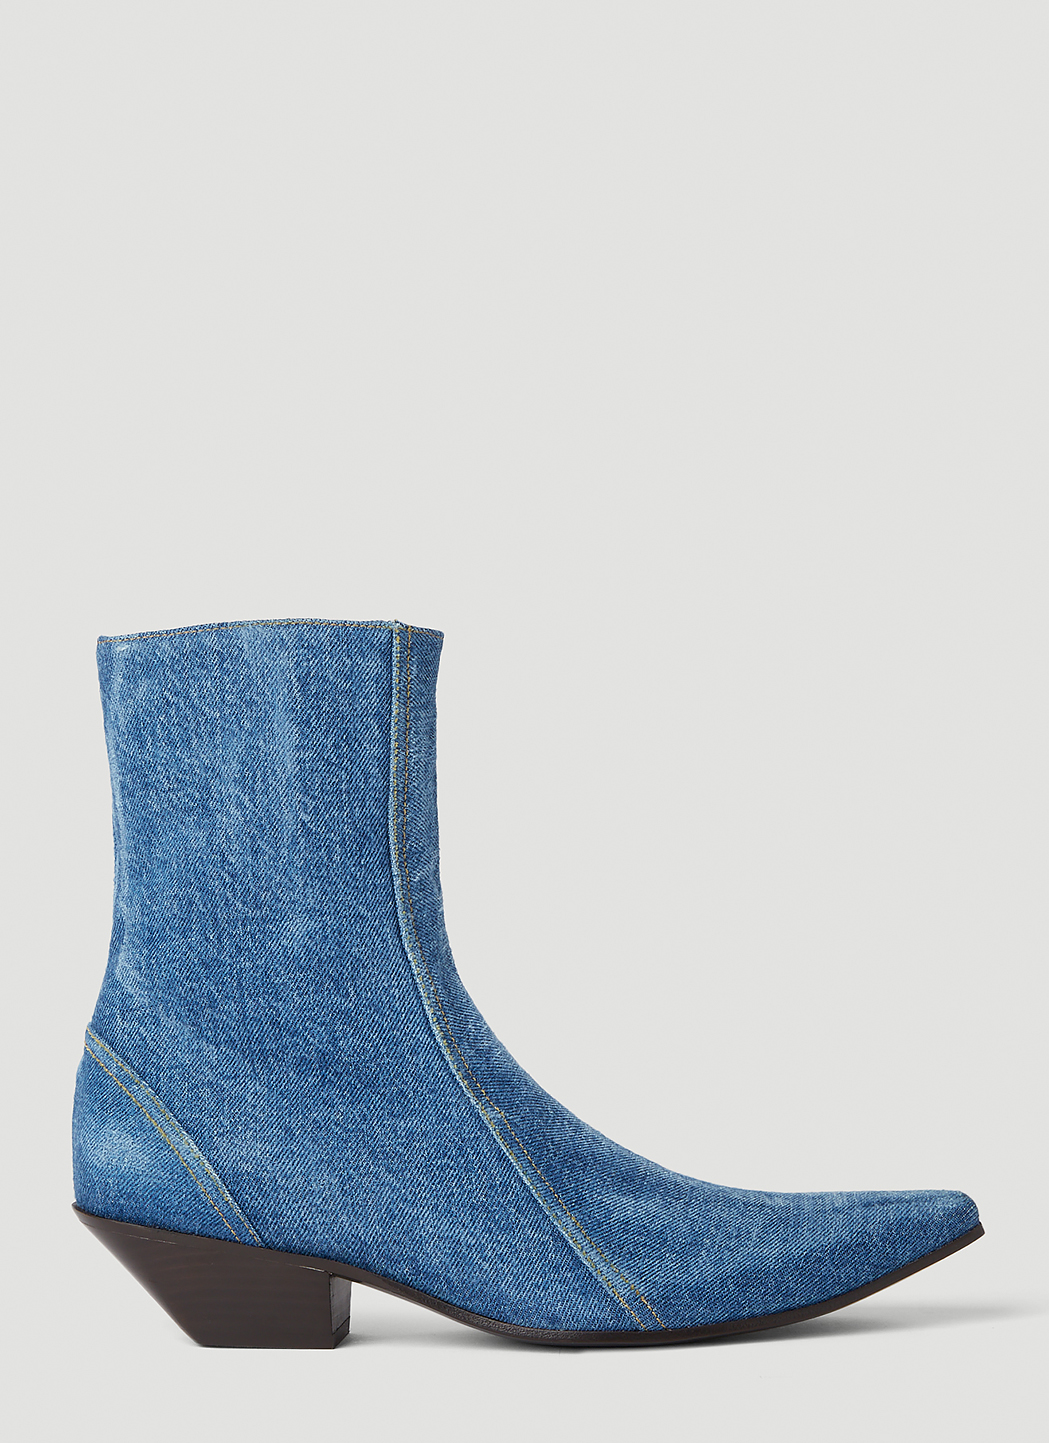 Denim Pointed Toe Boots